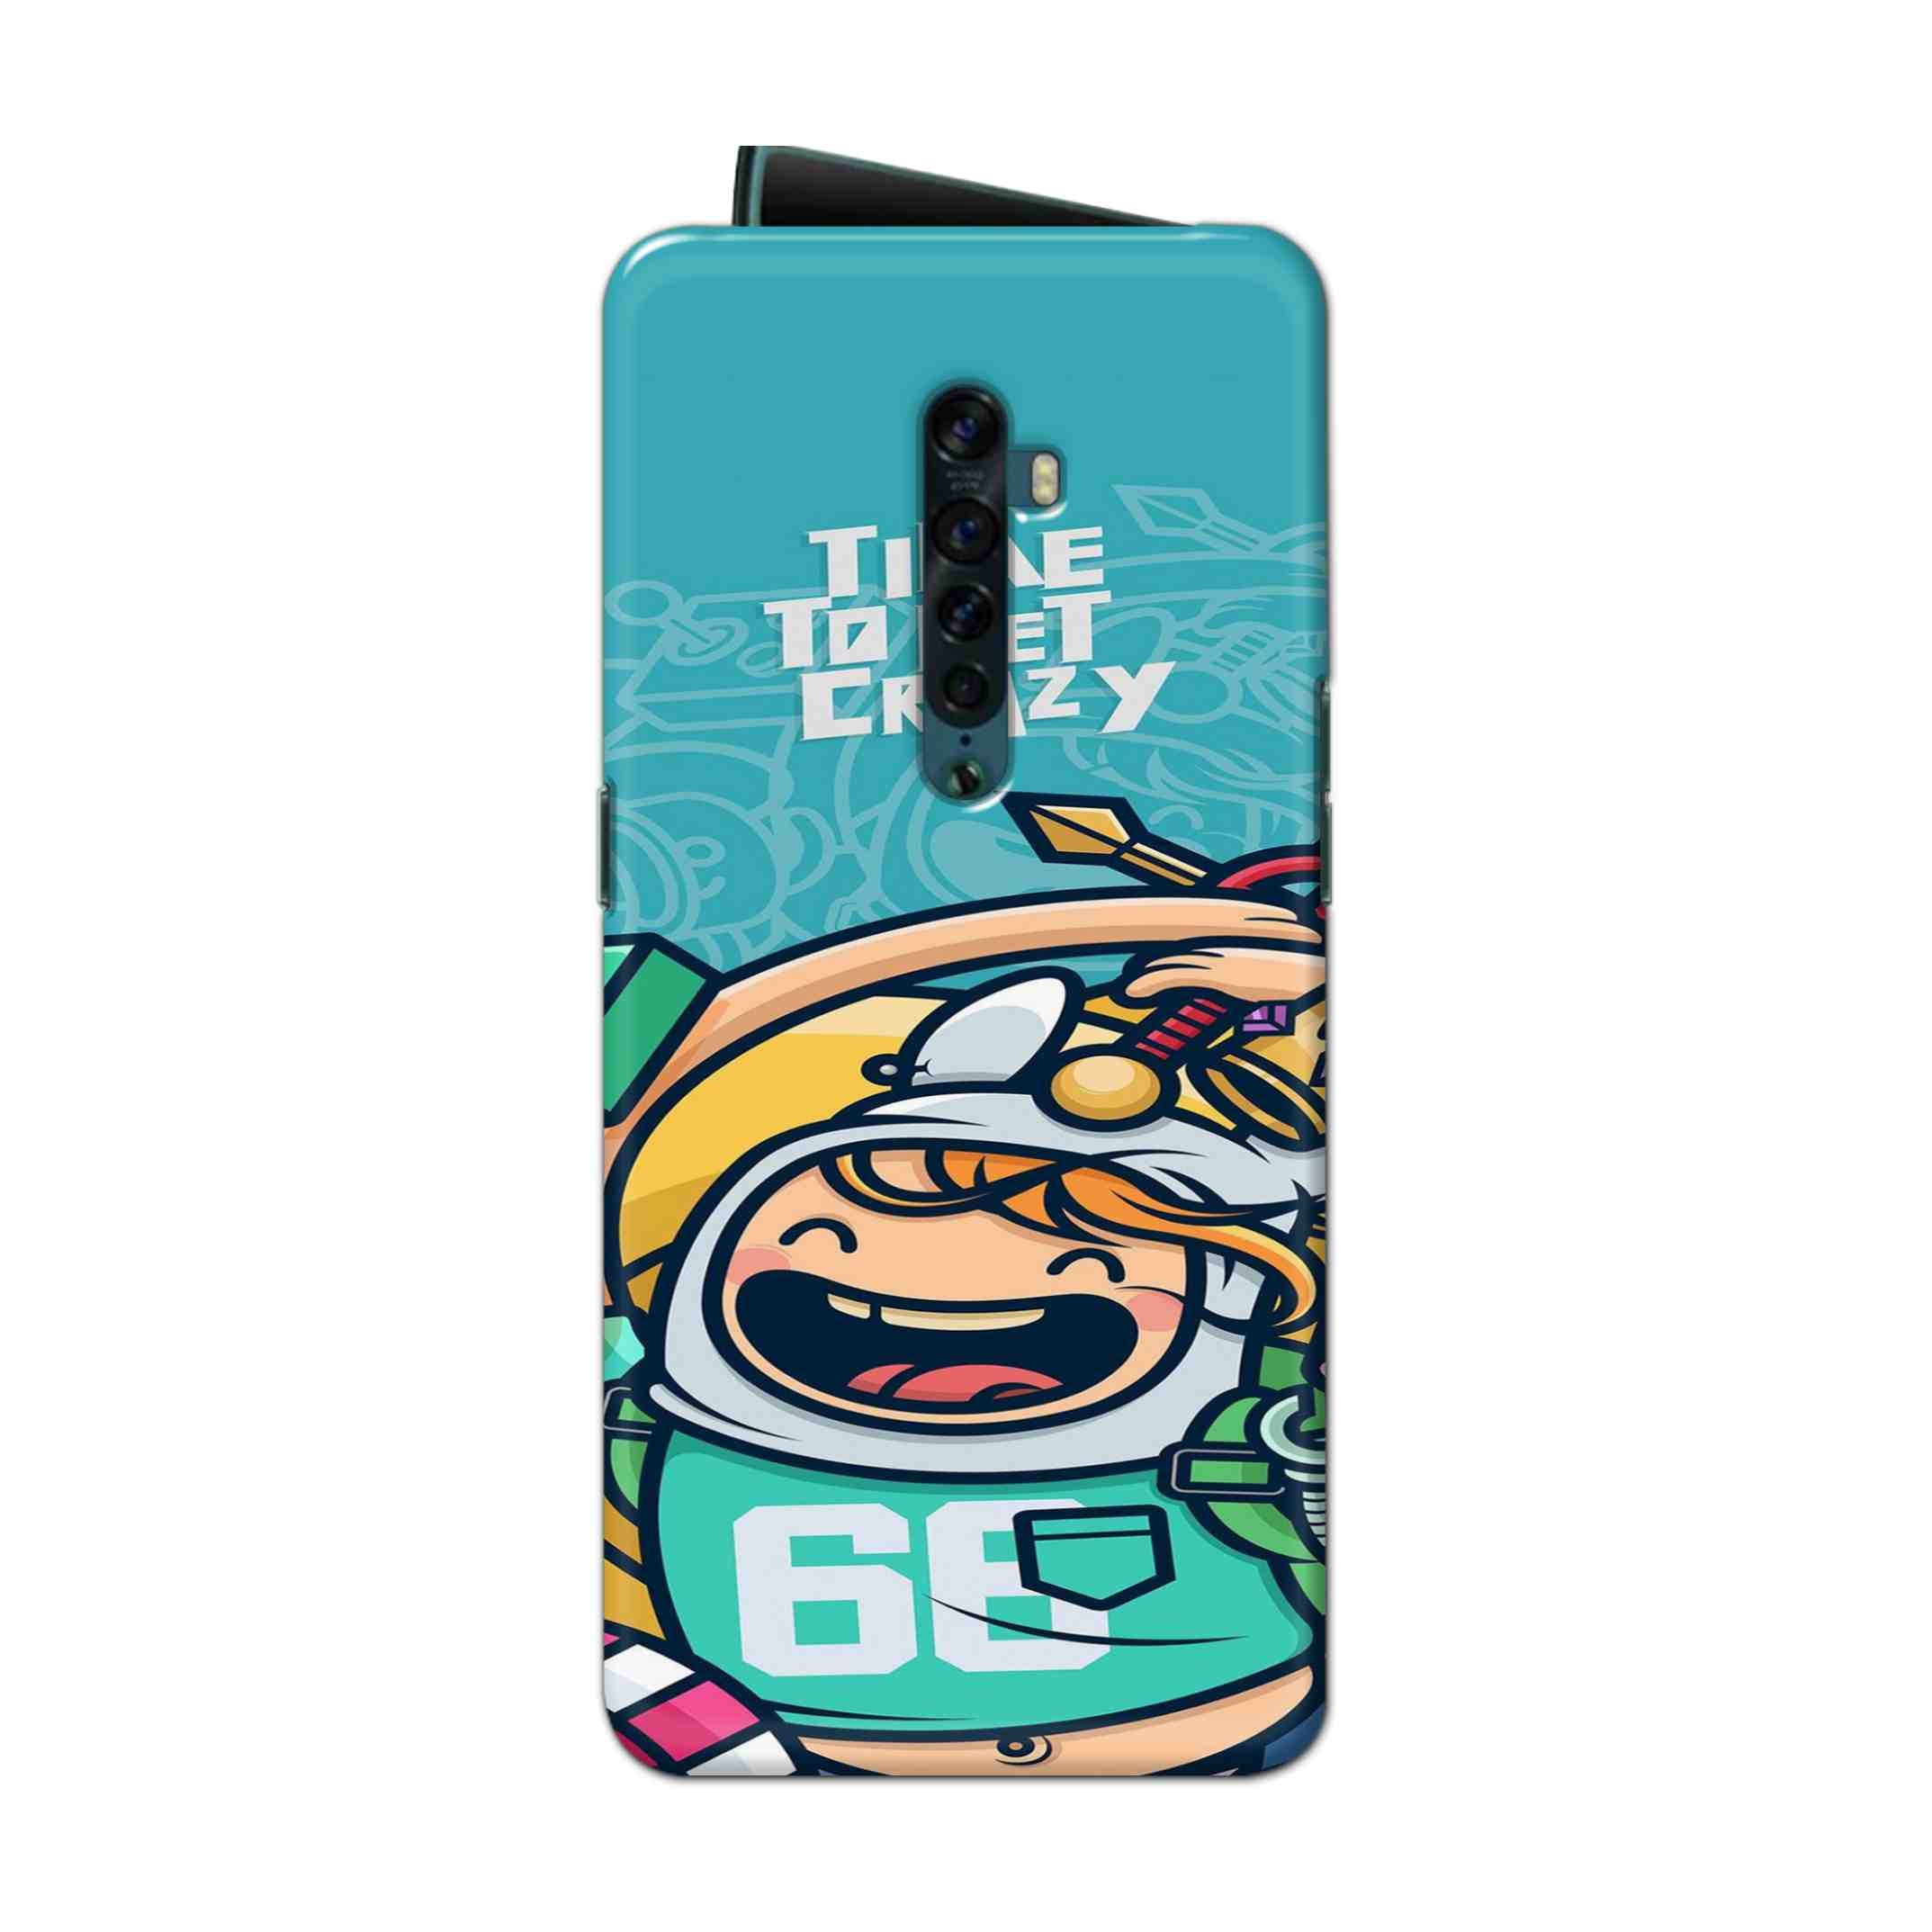 Buy Time To Get Crazy Hard Back Mobile Phone Case Cover For Oppo Reno 2 Online